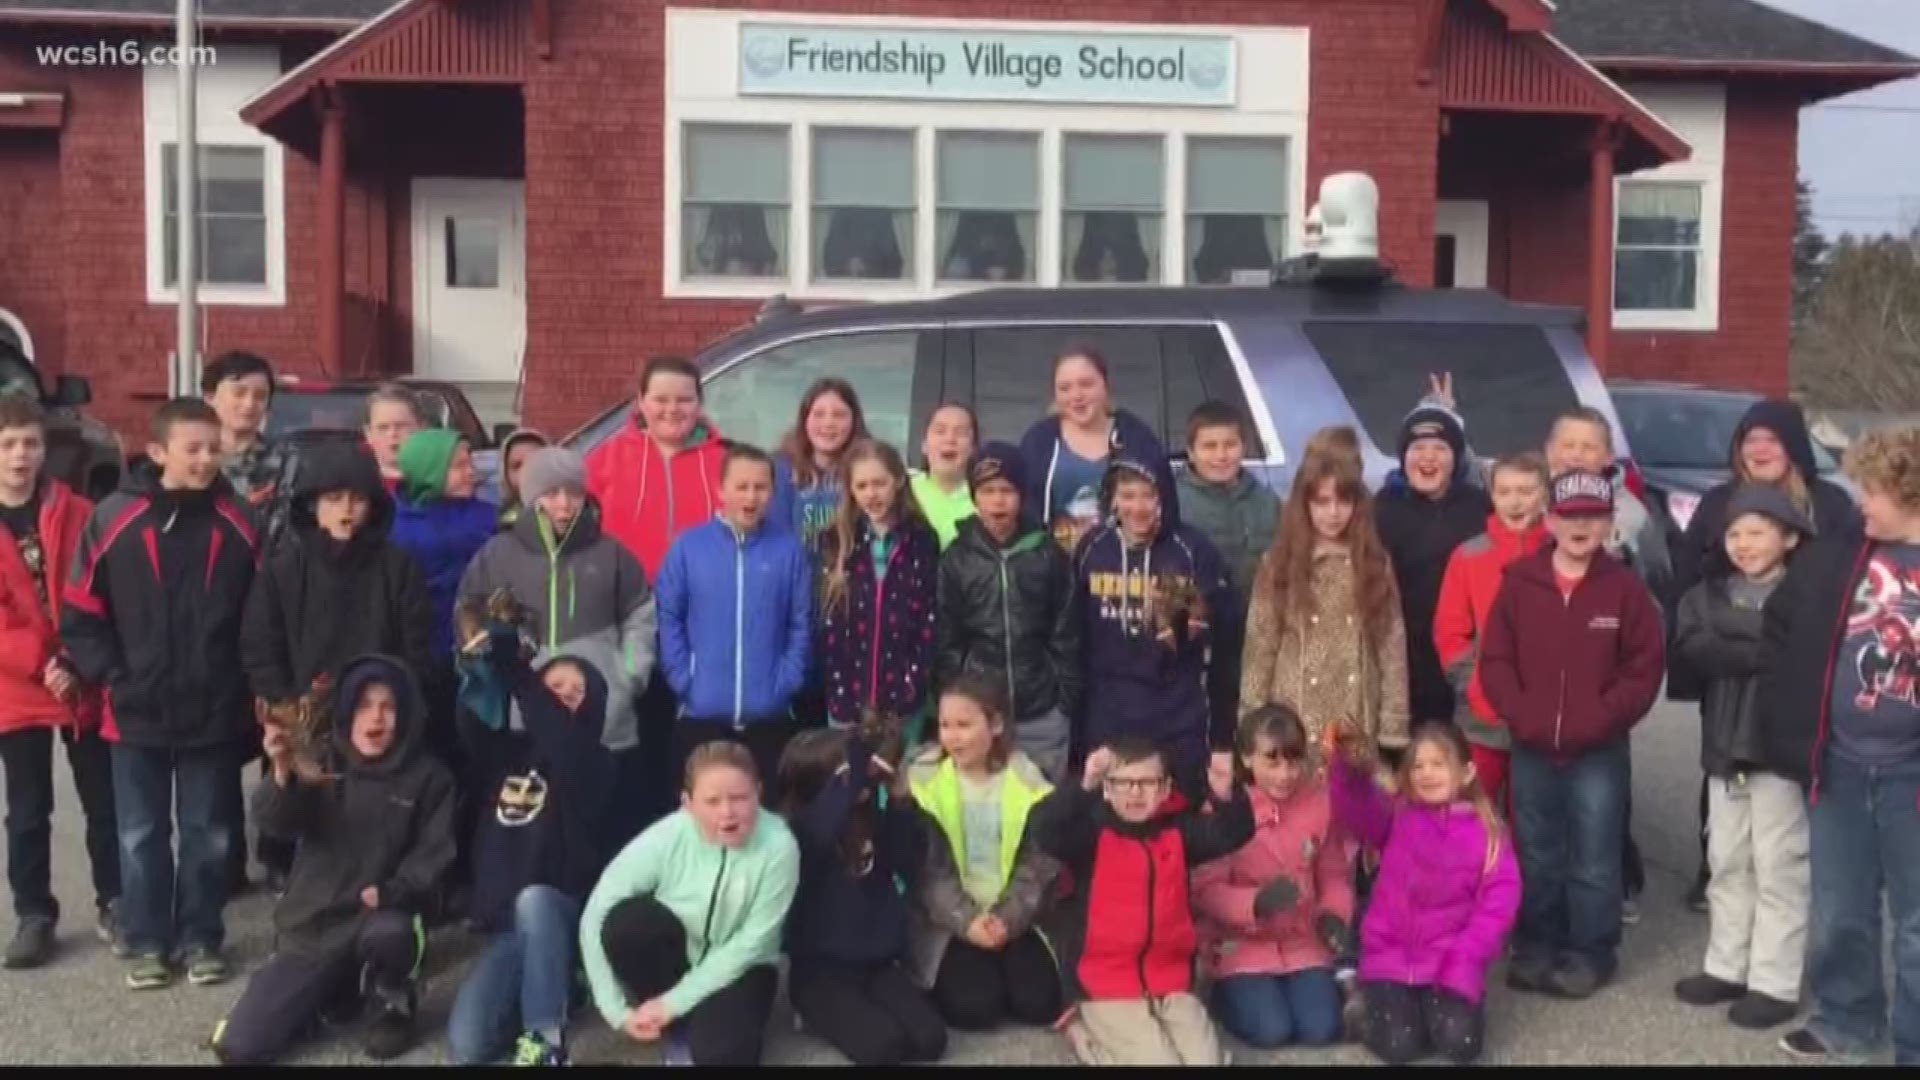 Unlike other schools that have presented Todd Gutner with gifts of donuts or cookies, students at Friendship Village School thanked him for his visit with a gift of live lobsters